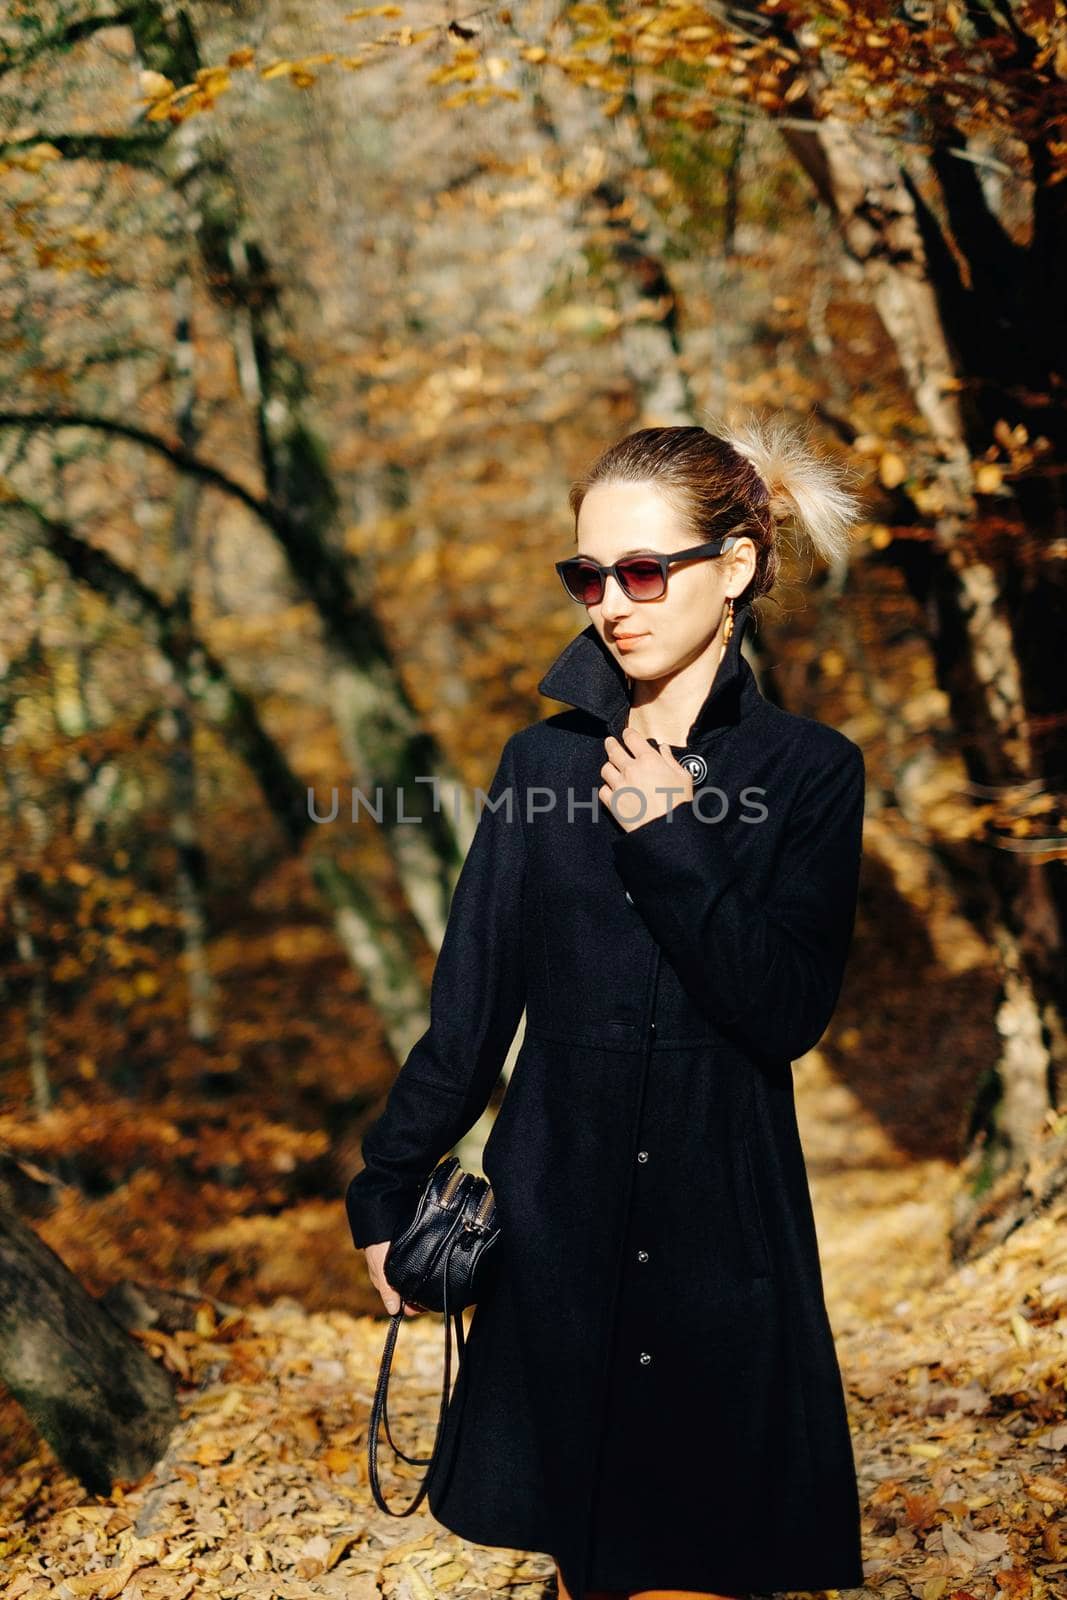 Fashionable young woman wearing in coat and sunglasses walking in autumn park.